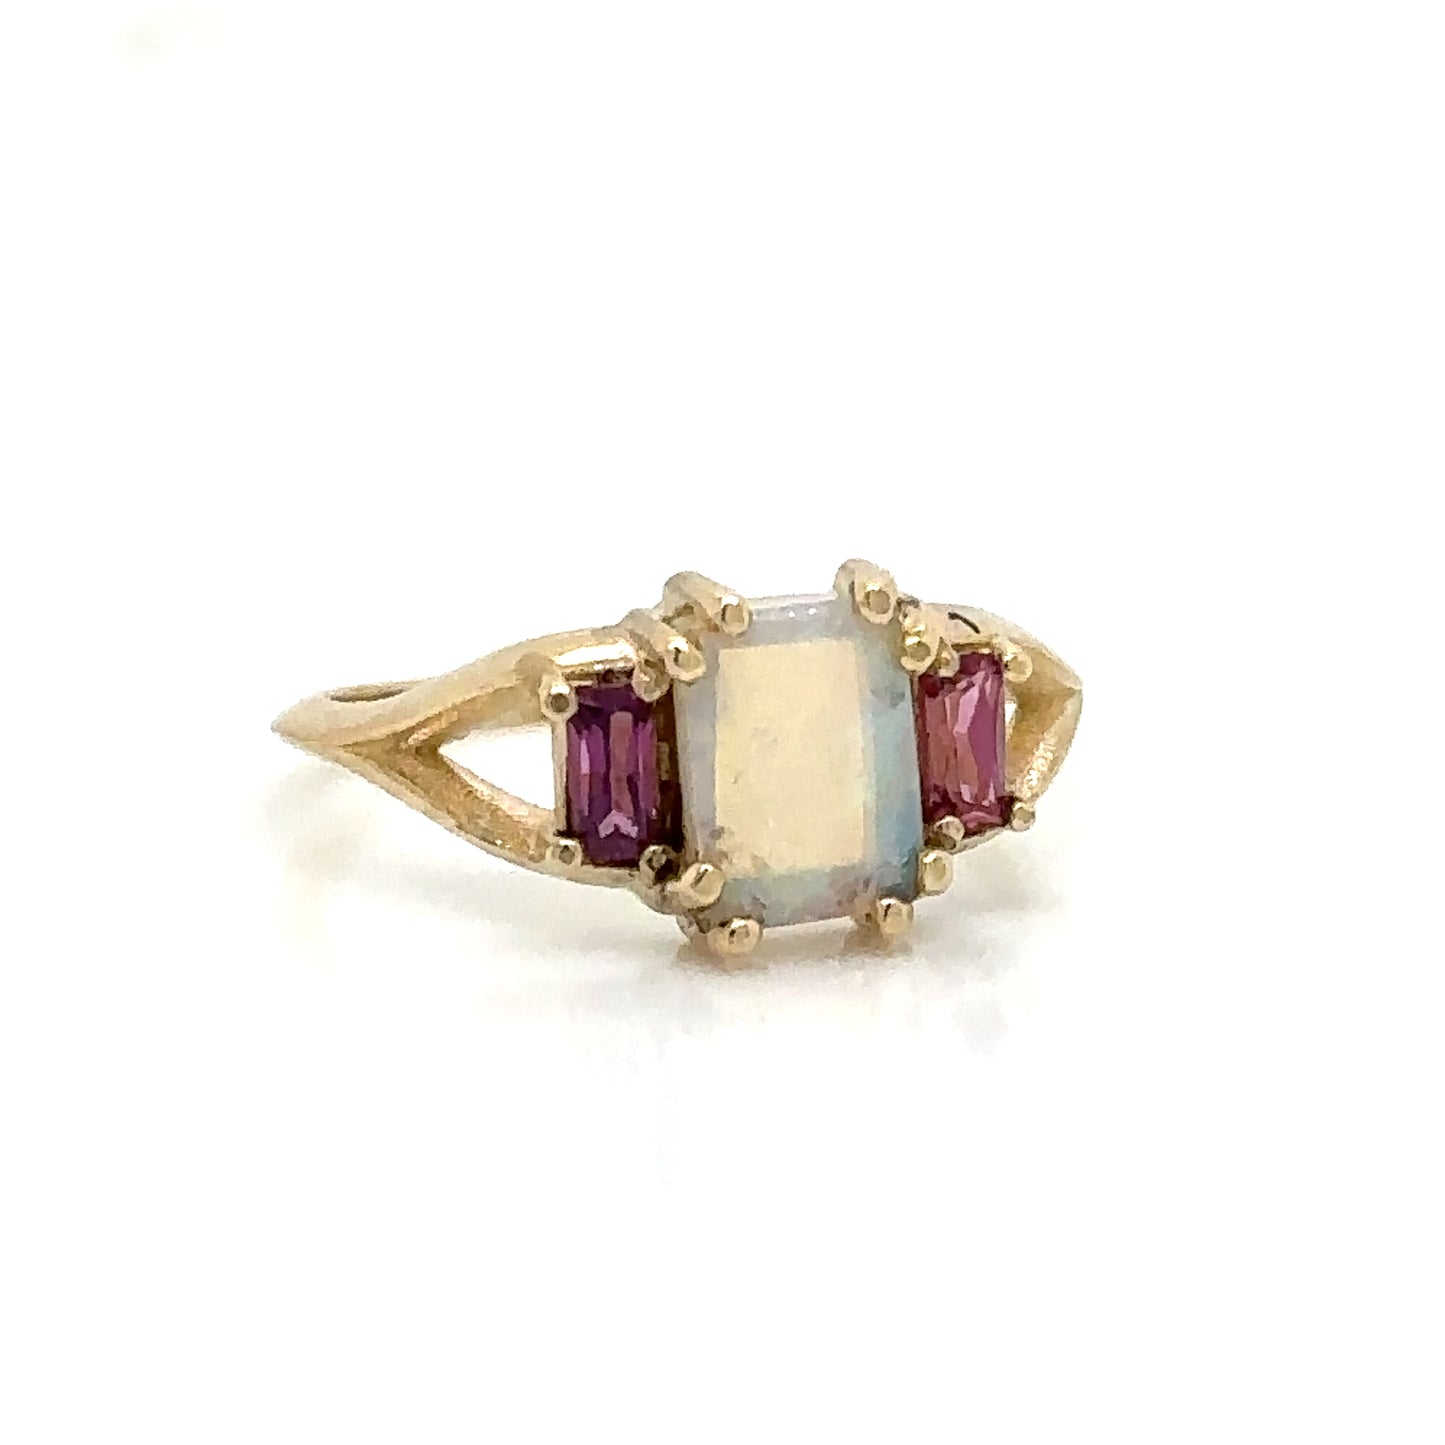 IMMEDIATE DELIVERY / Rectangular Opal Ring with Bagette Cut Rhodolites / 14k Yellow Gold / Size 7